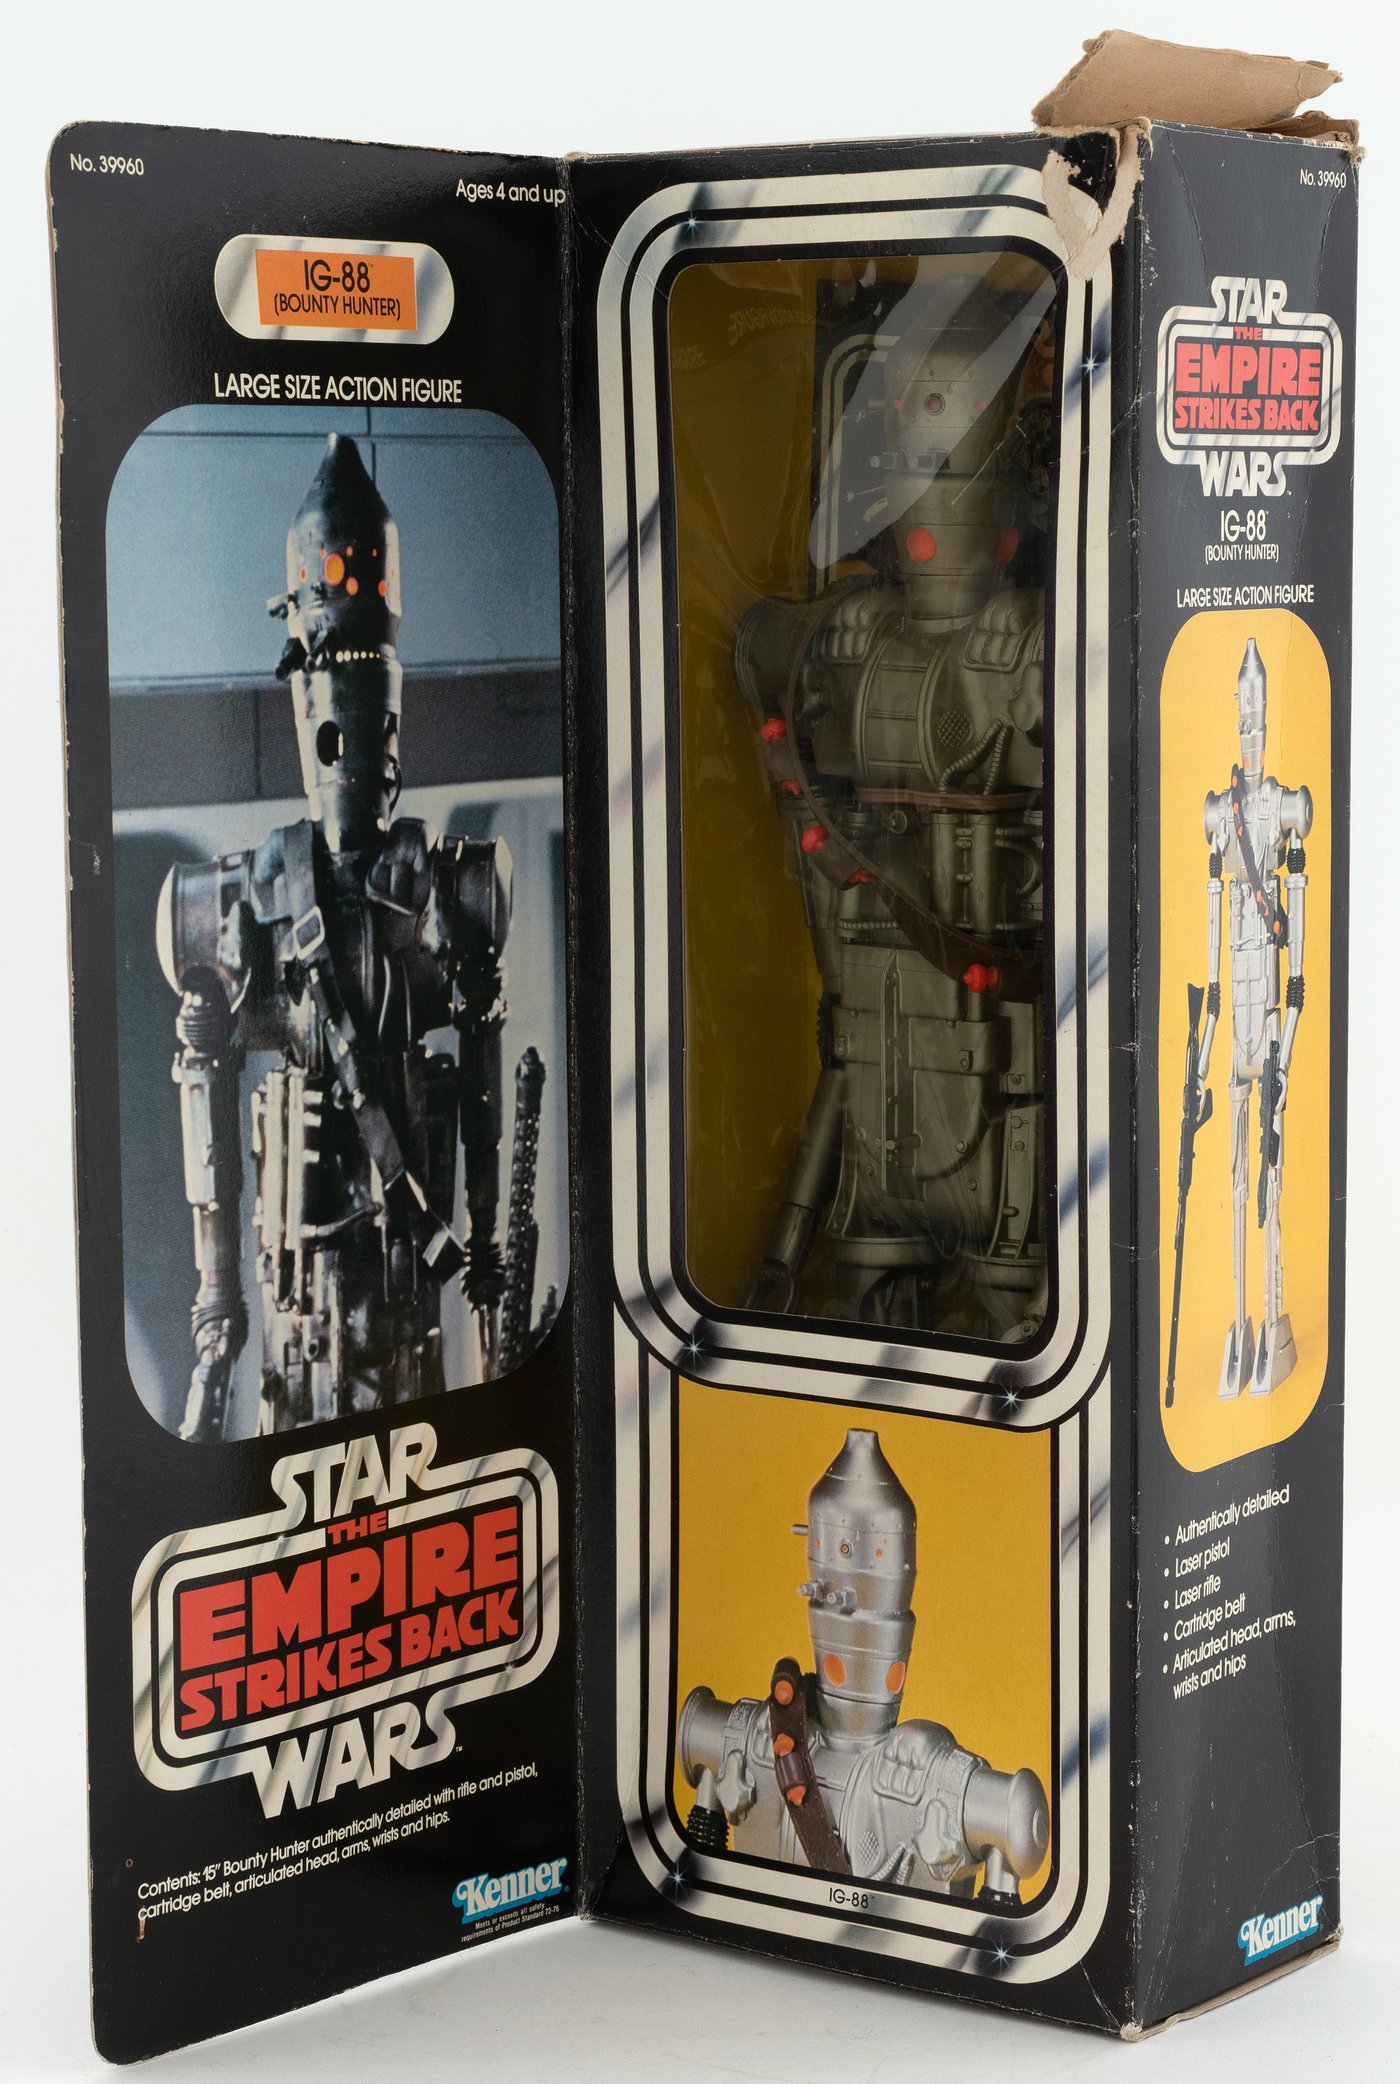 Hakes Star Wars The Empire Strikes Back Ig 88 Boxed Large Size Action Figure